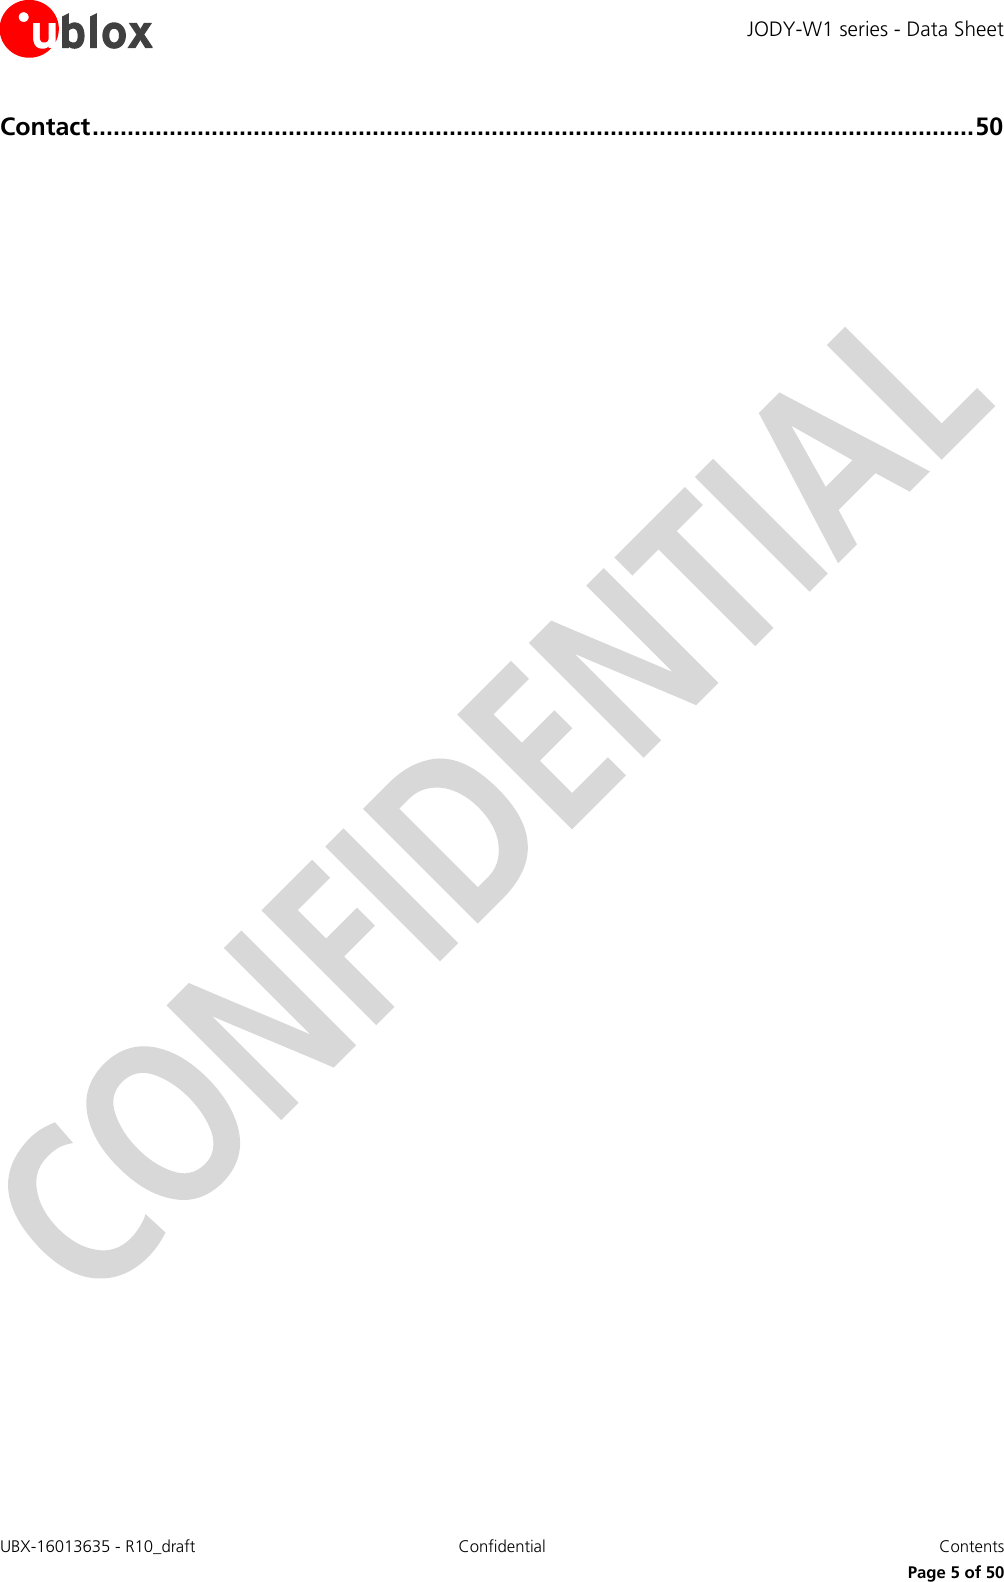 JODY-W1 series - Data Sheet UBX-16013635 - R10_draft Confidential  Contents     Page 5 of 50 Contact .............................................................................................................................. 50  